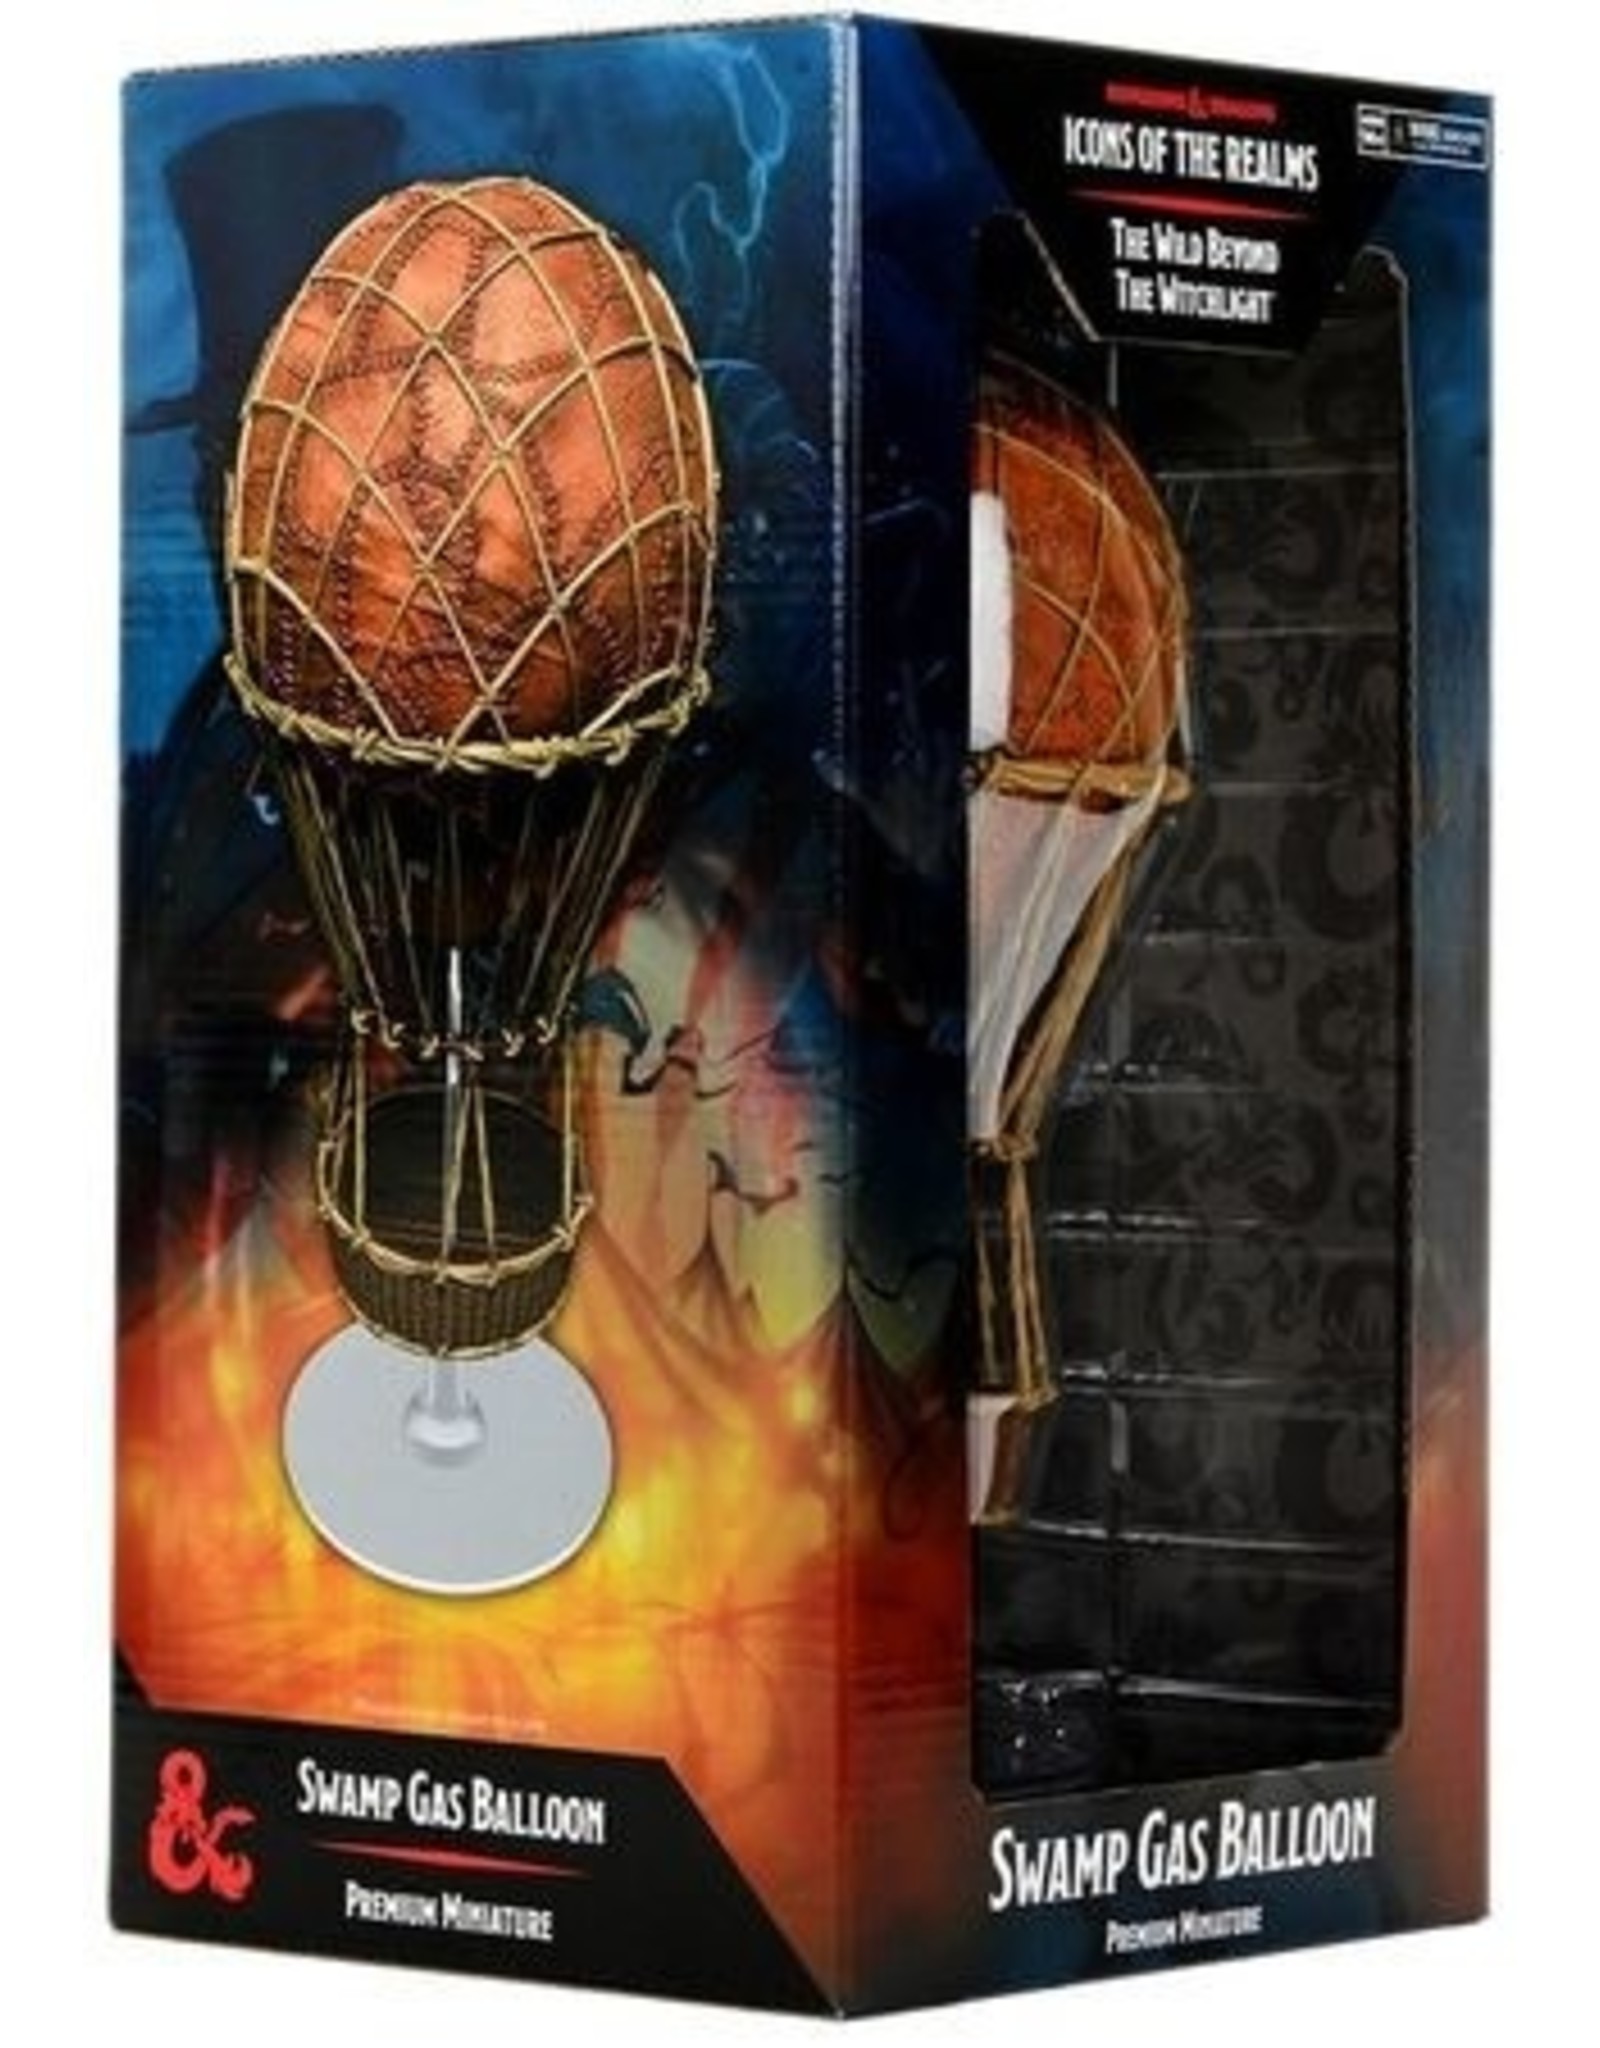 Wizard of the coast D&D - Icons of the realms - The wild beyond the witchlight - Swamp gas balloon premium miniature